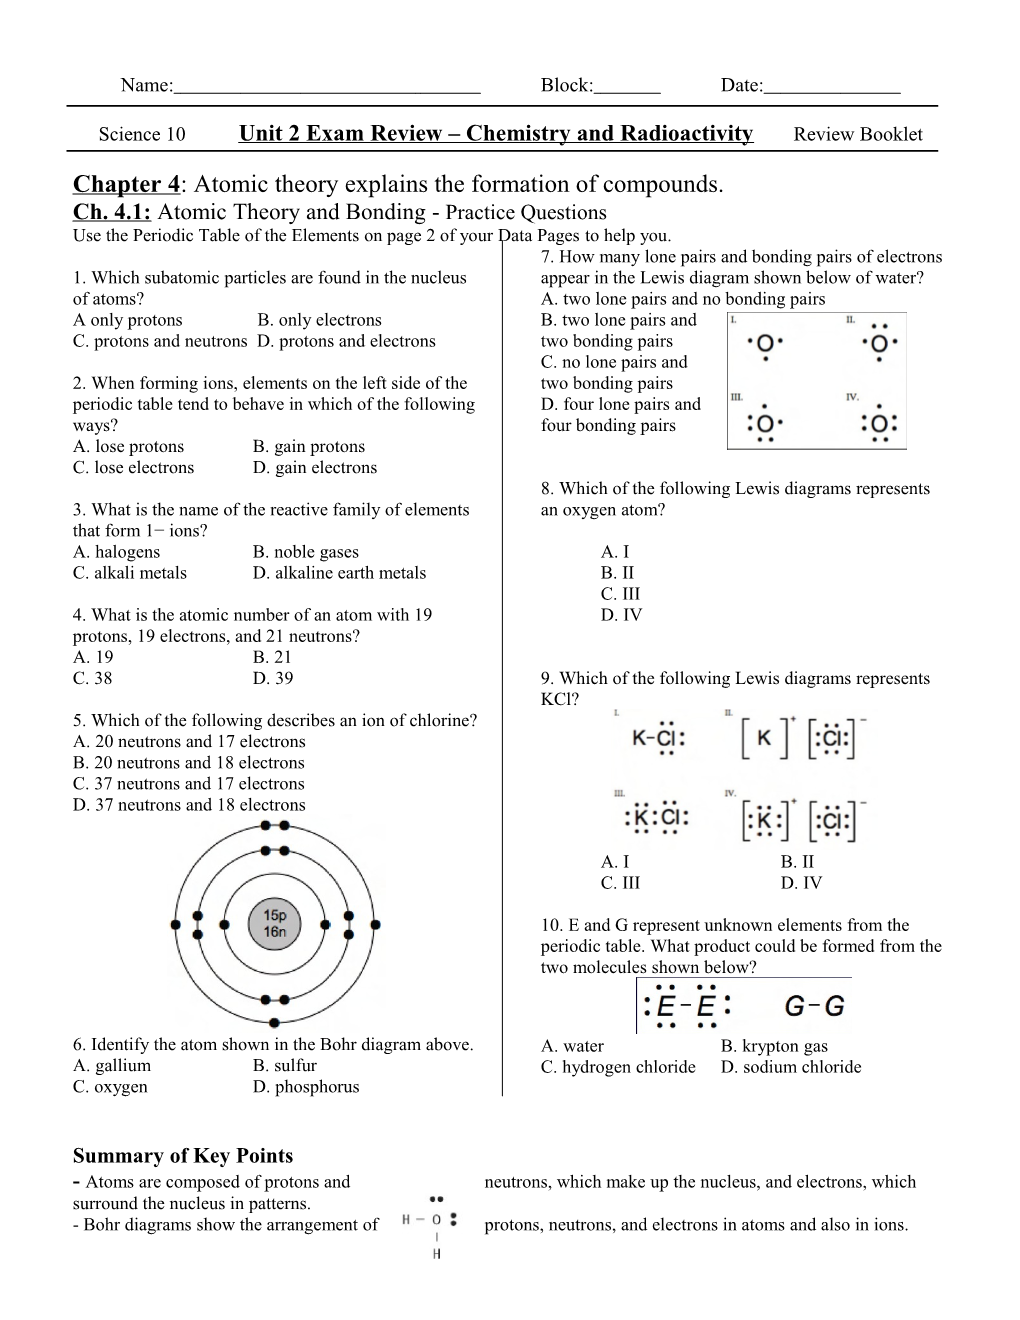 Science 10 Unit 2 Exam Review Chemistry and Radioactivity Review Booklet